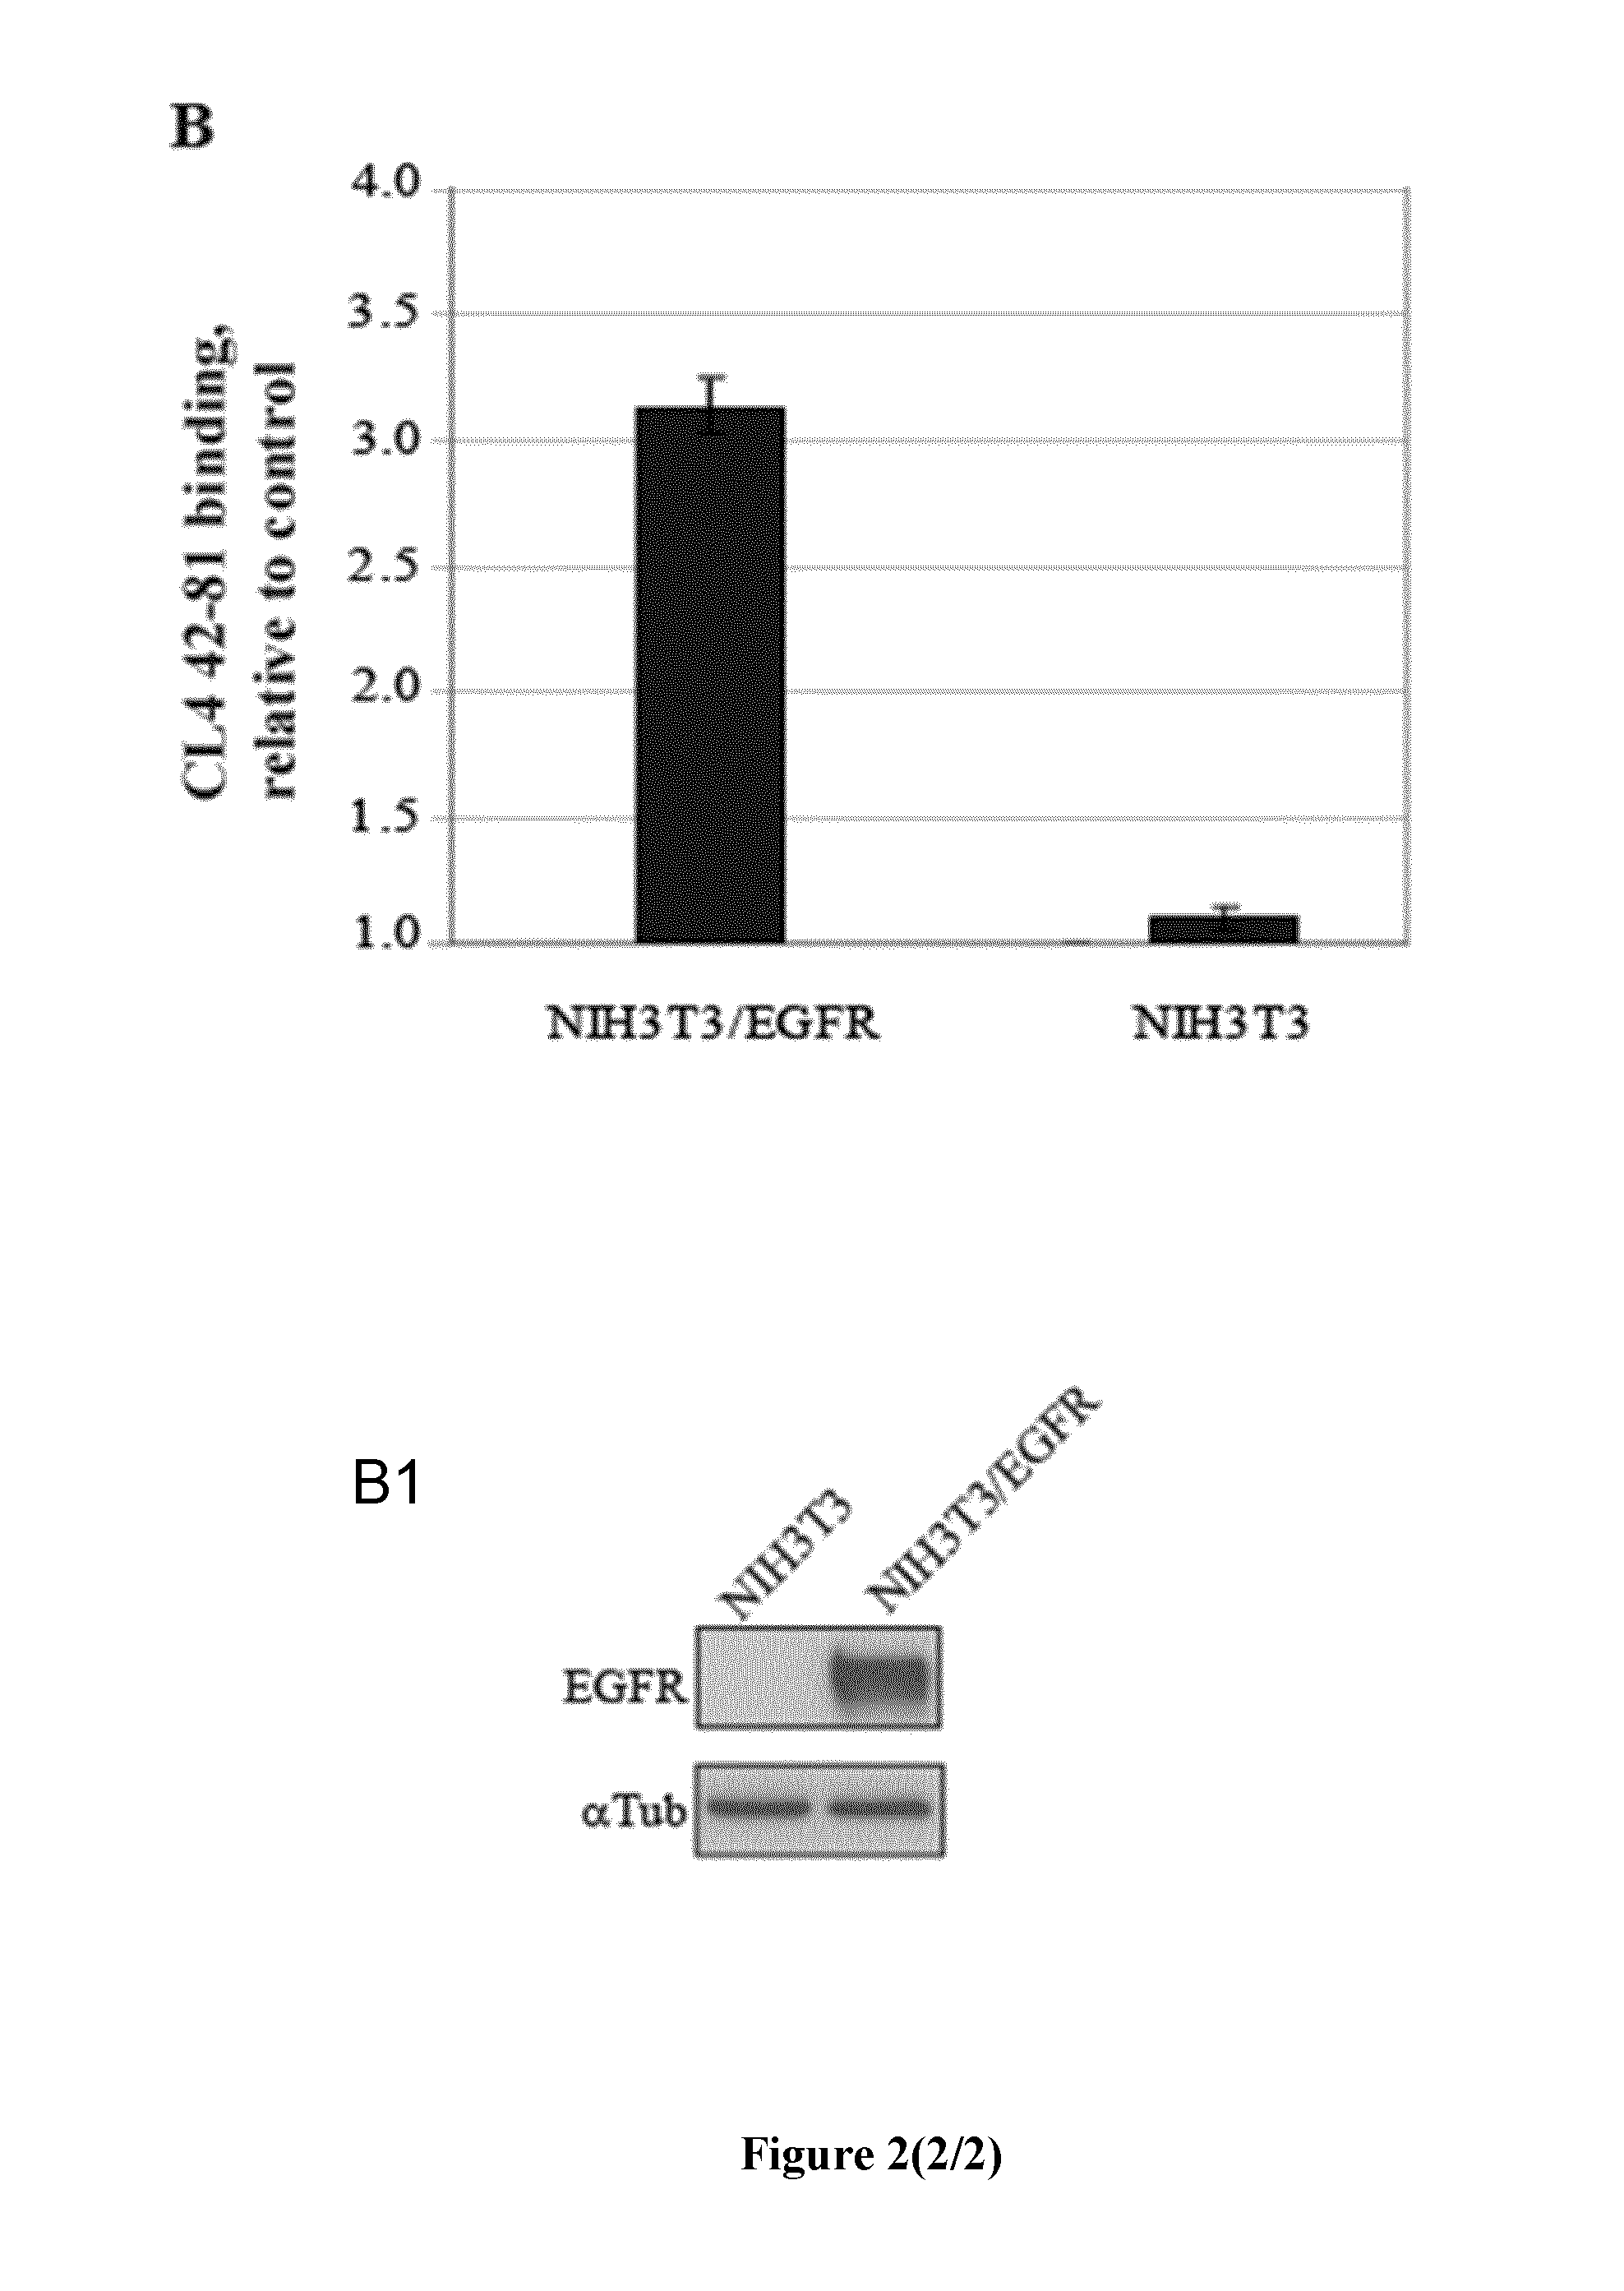 EGFR aptamer inhibitor for use in therapy and diagnosis